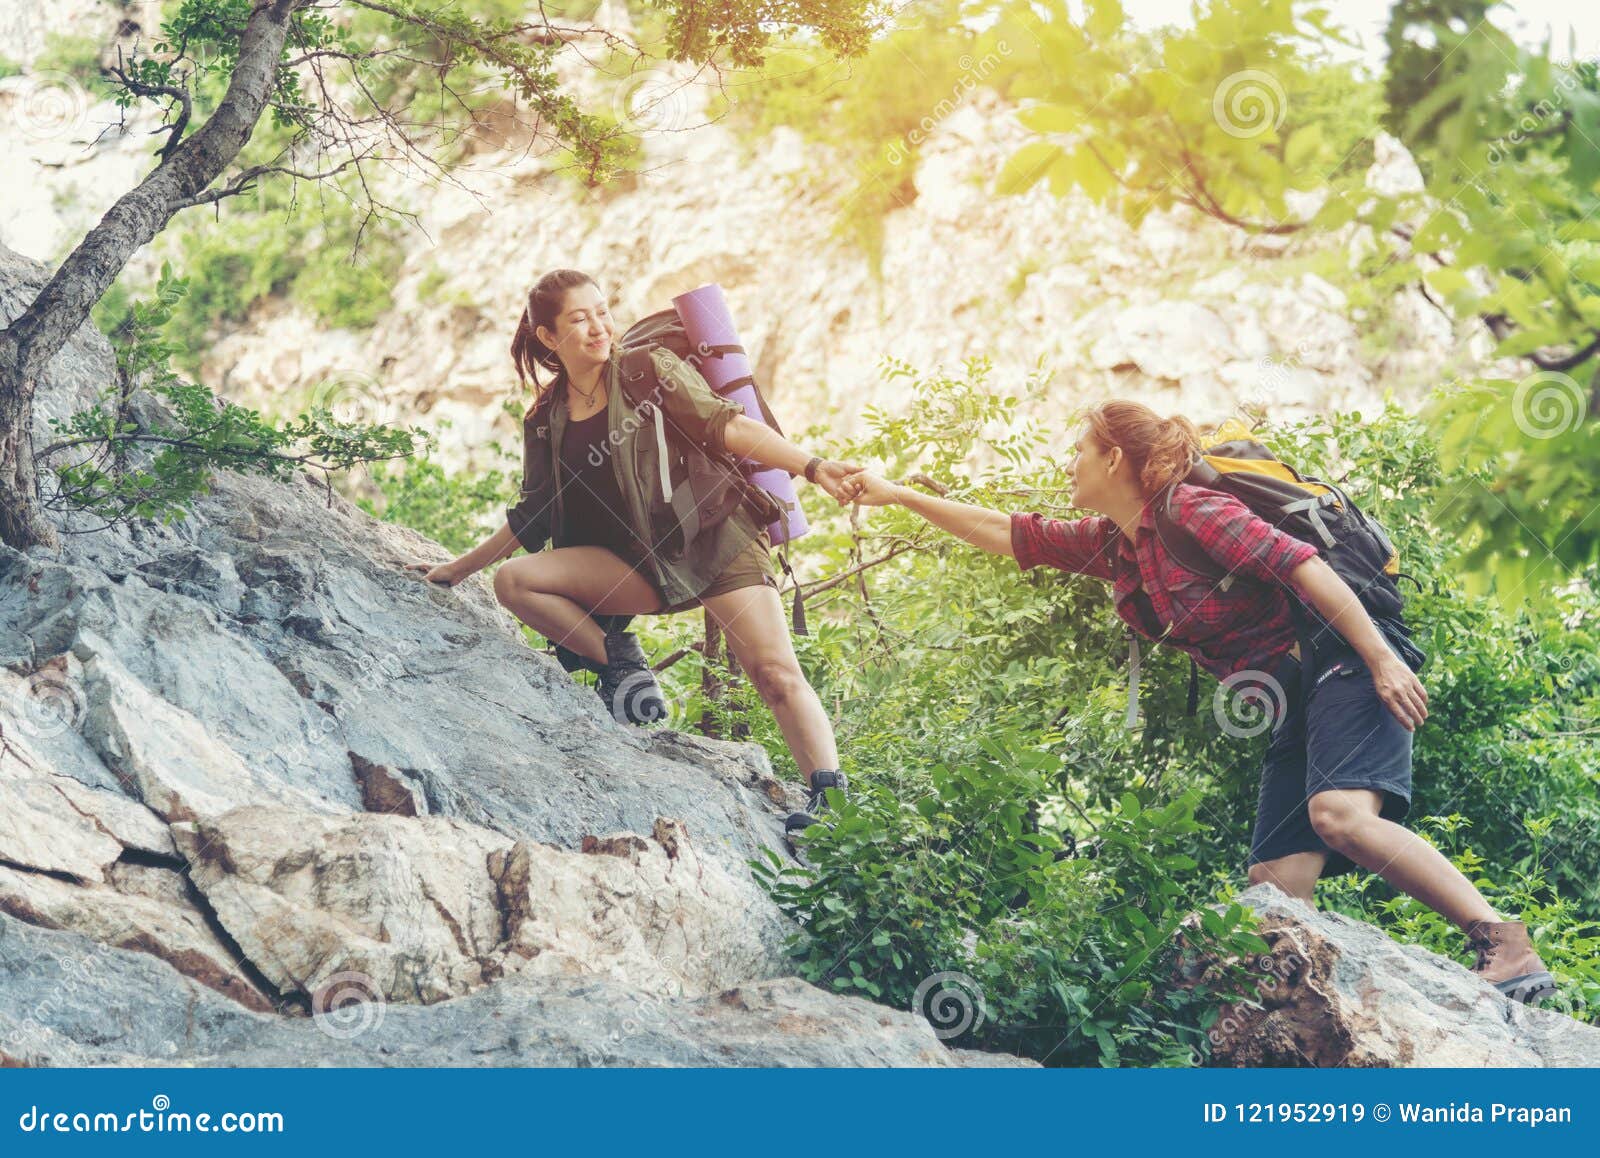 group hiker woman helping her friend climb up the last section of sunset in mountains. traveler teamwork walking in outdoor lifest